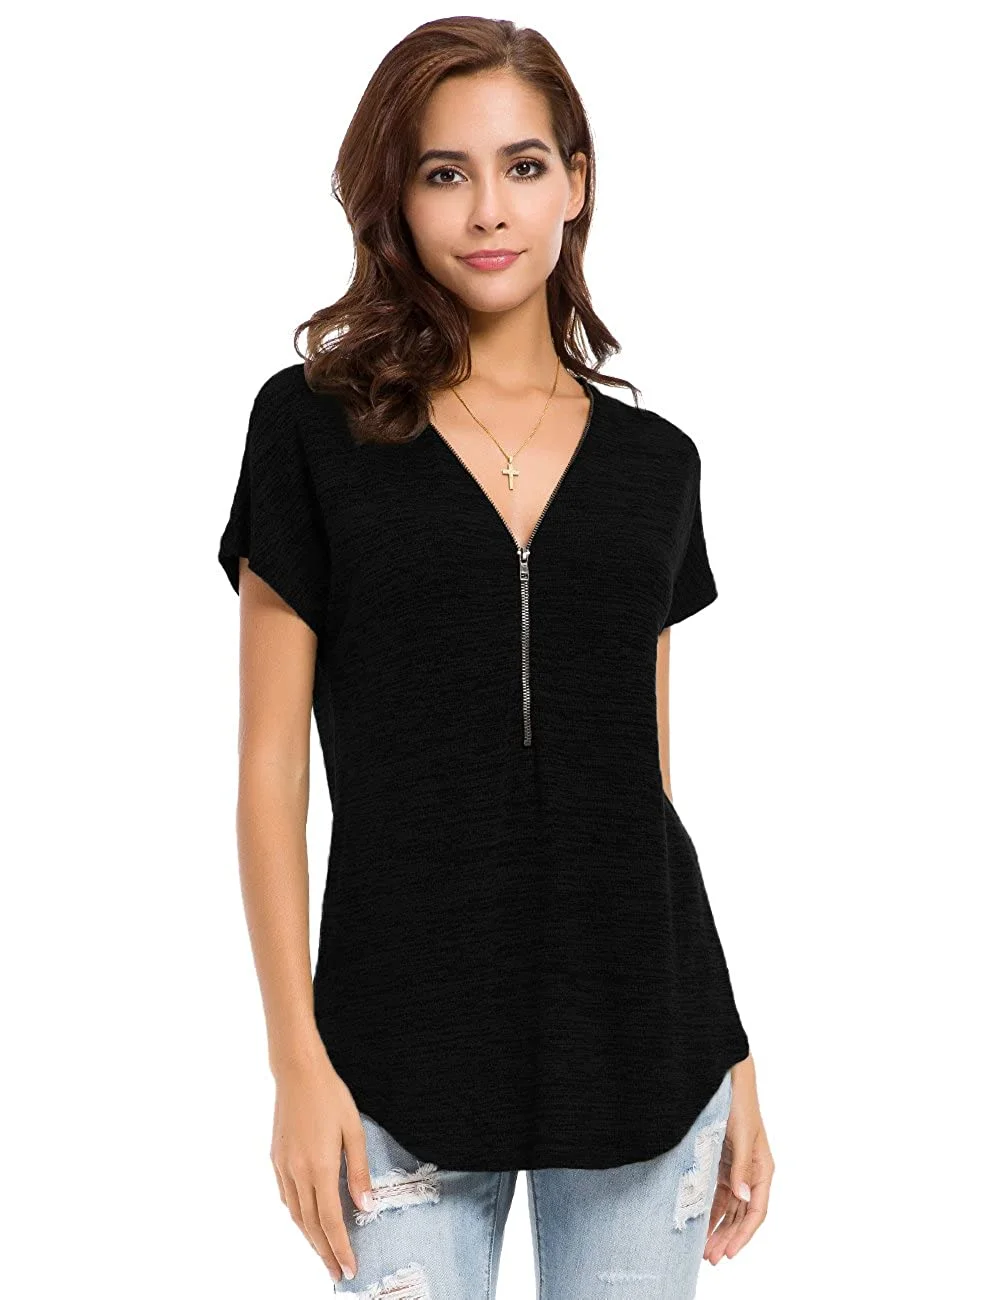 Womens Loose Fitting Zip Up Deep V Neck Short Sleeve Tops Tunic Casual T Shirts Blouse